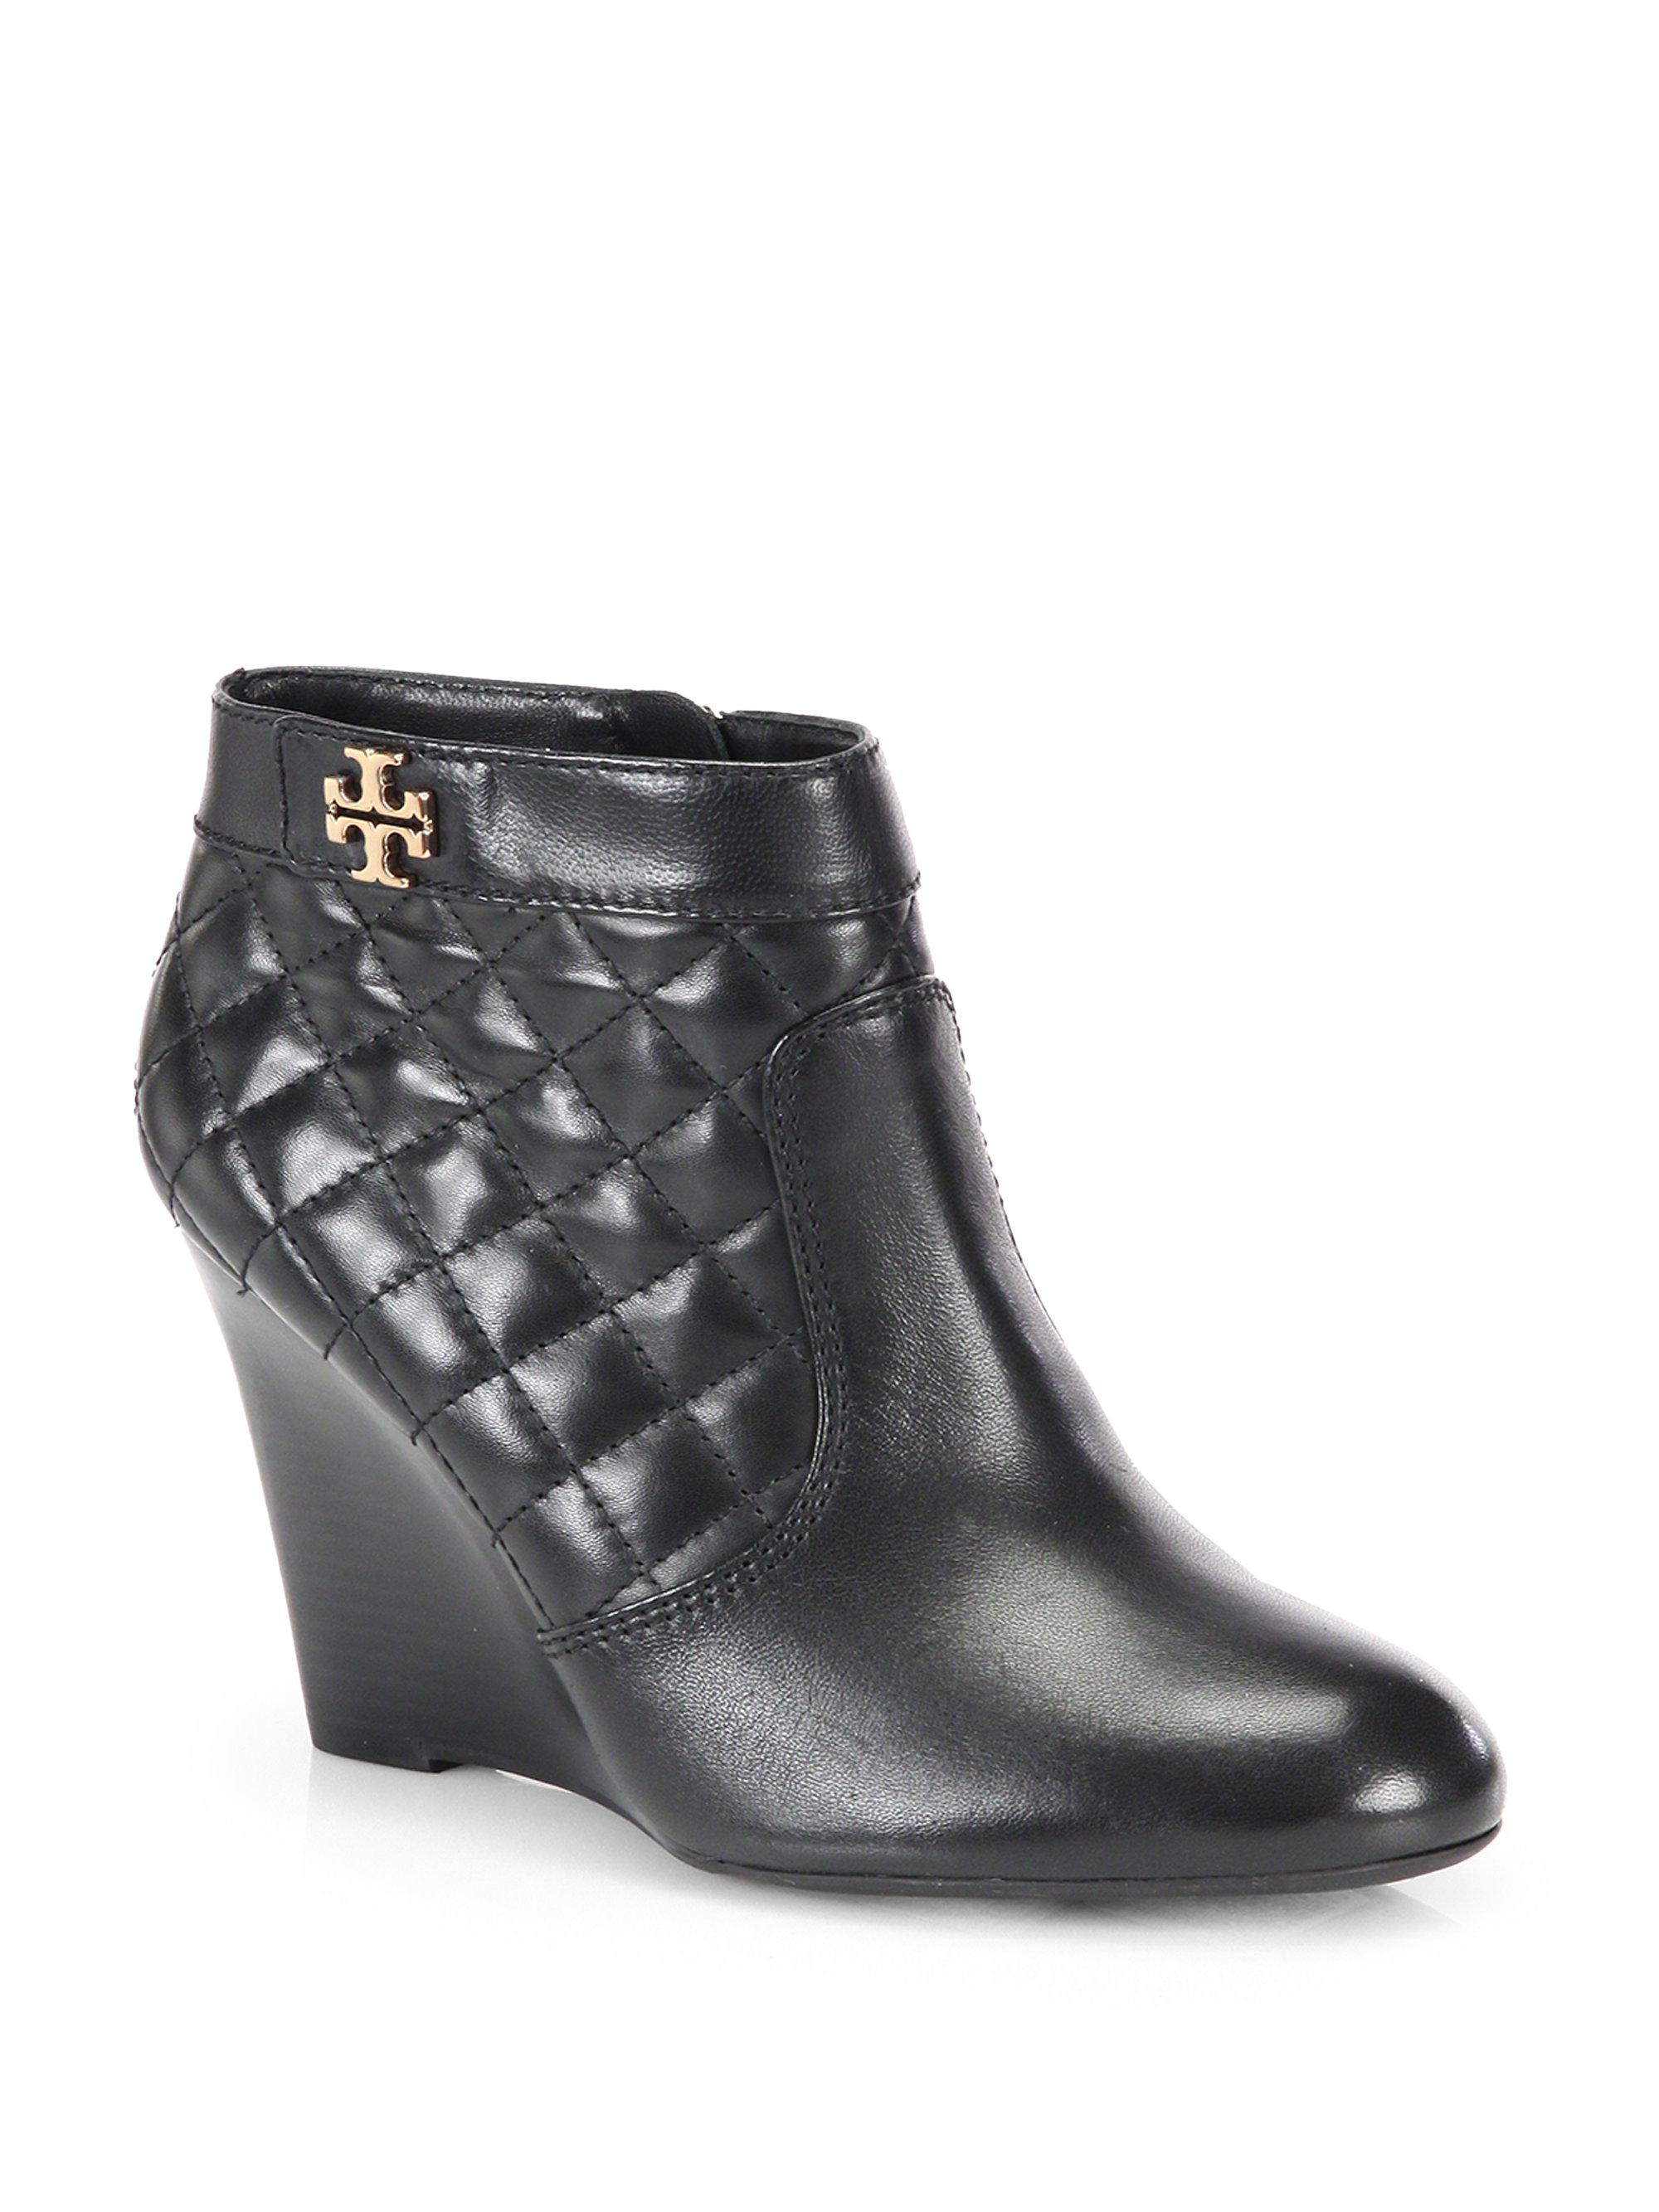 Tory Burch Leila Quilted Leather Wedge Ankle Boots in Black | Lyst